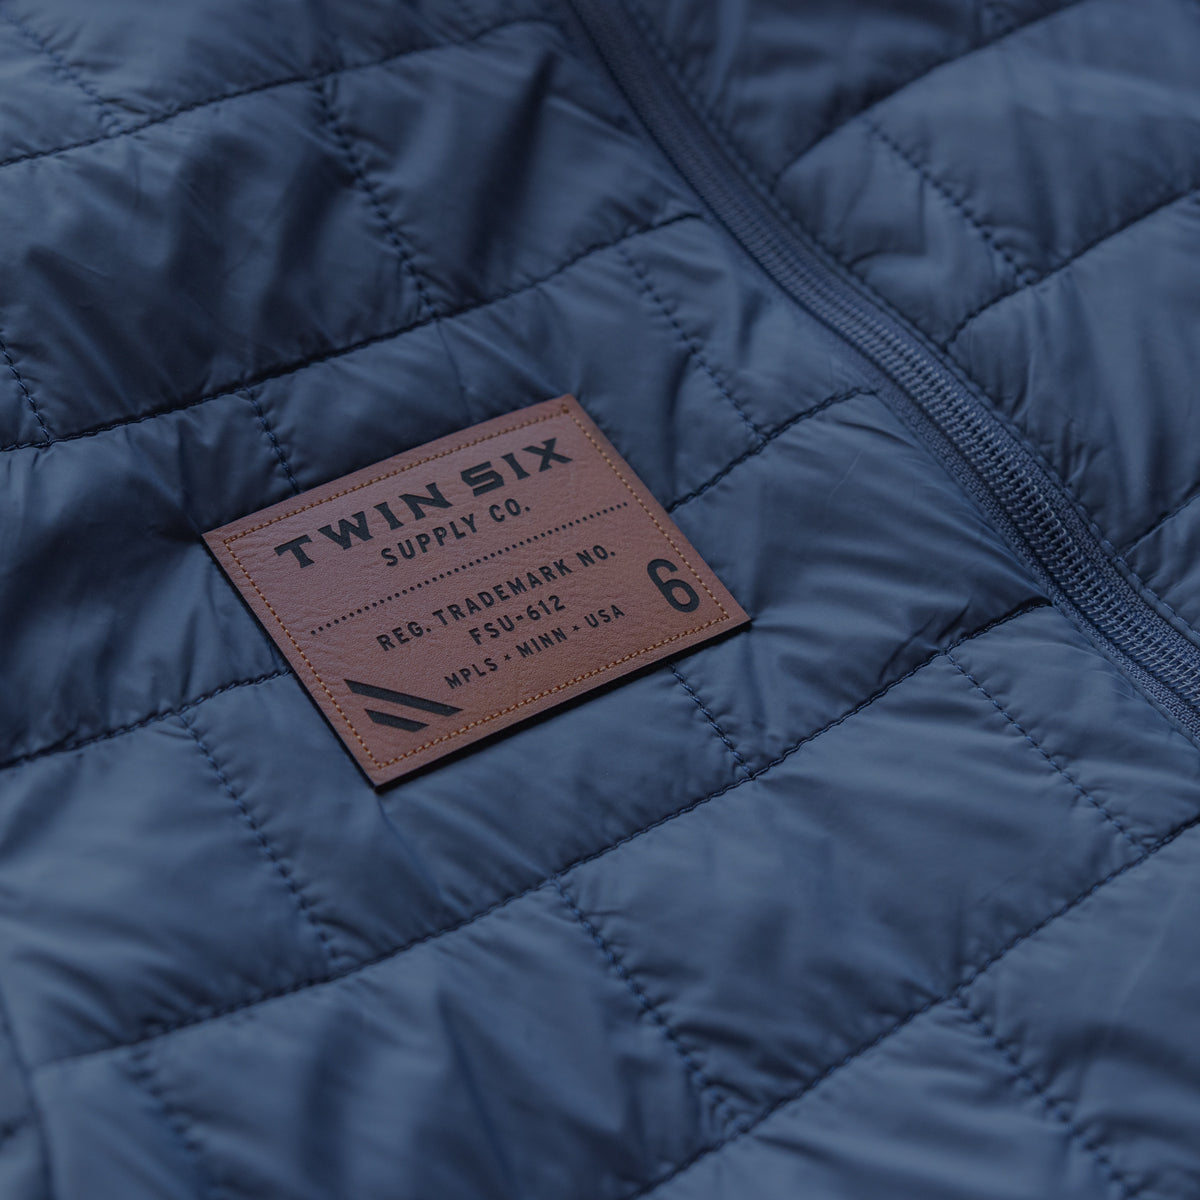 T6 Supply Co. Puffer Jacket